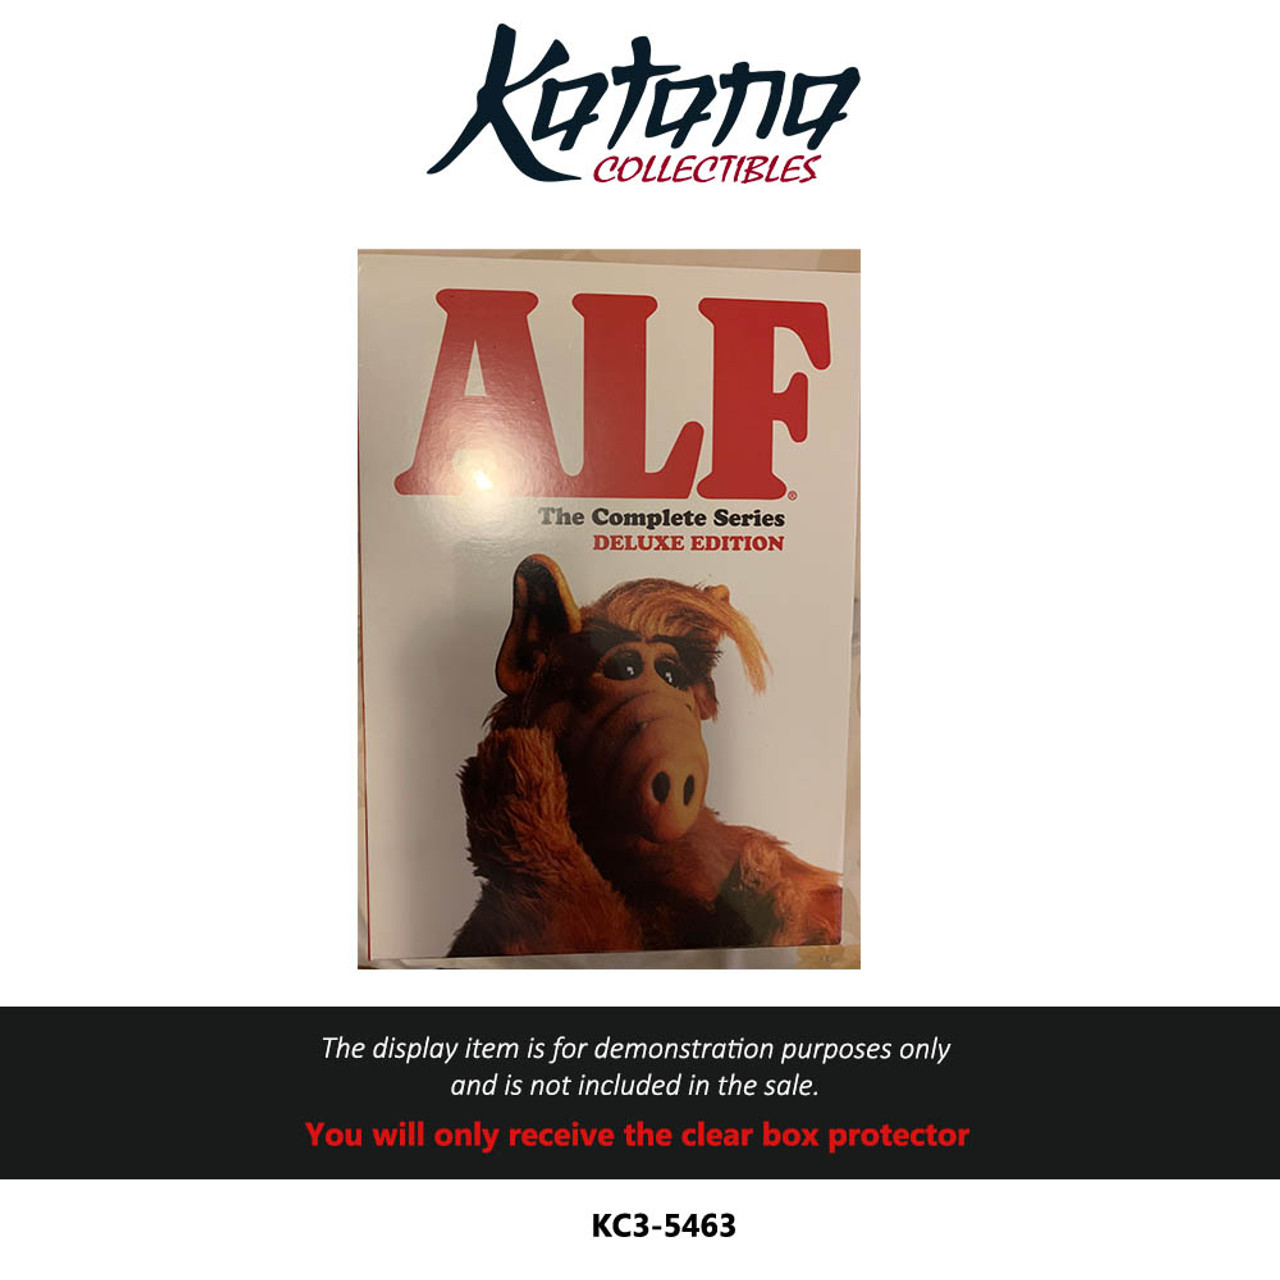 Katana Collectibles Protector For Alf Complete Series DVD ( Shout)